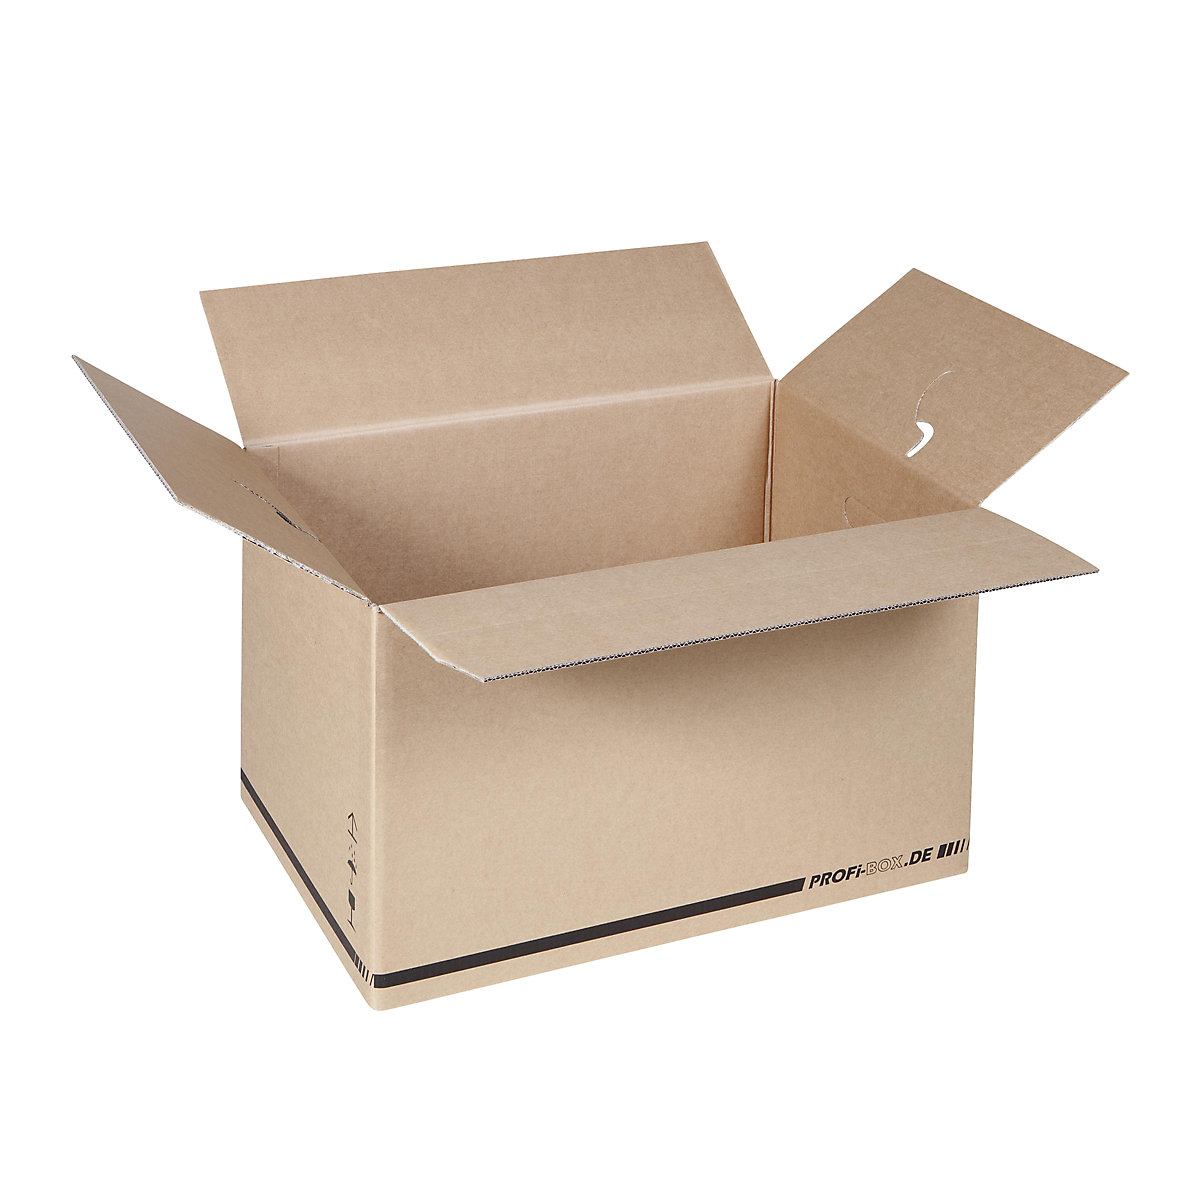 Professional boxes, made of double fluted cardboard, internal dimensions 574 x 376 x 340 mm, FEFCO 0216, pack of 50-3